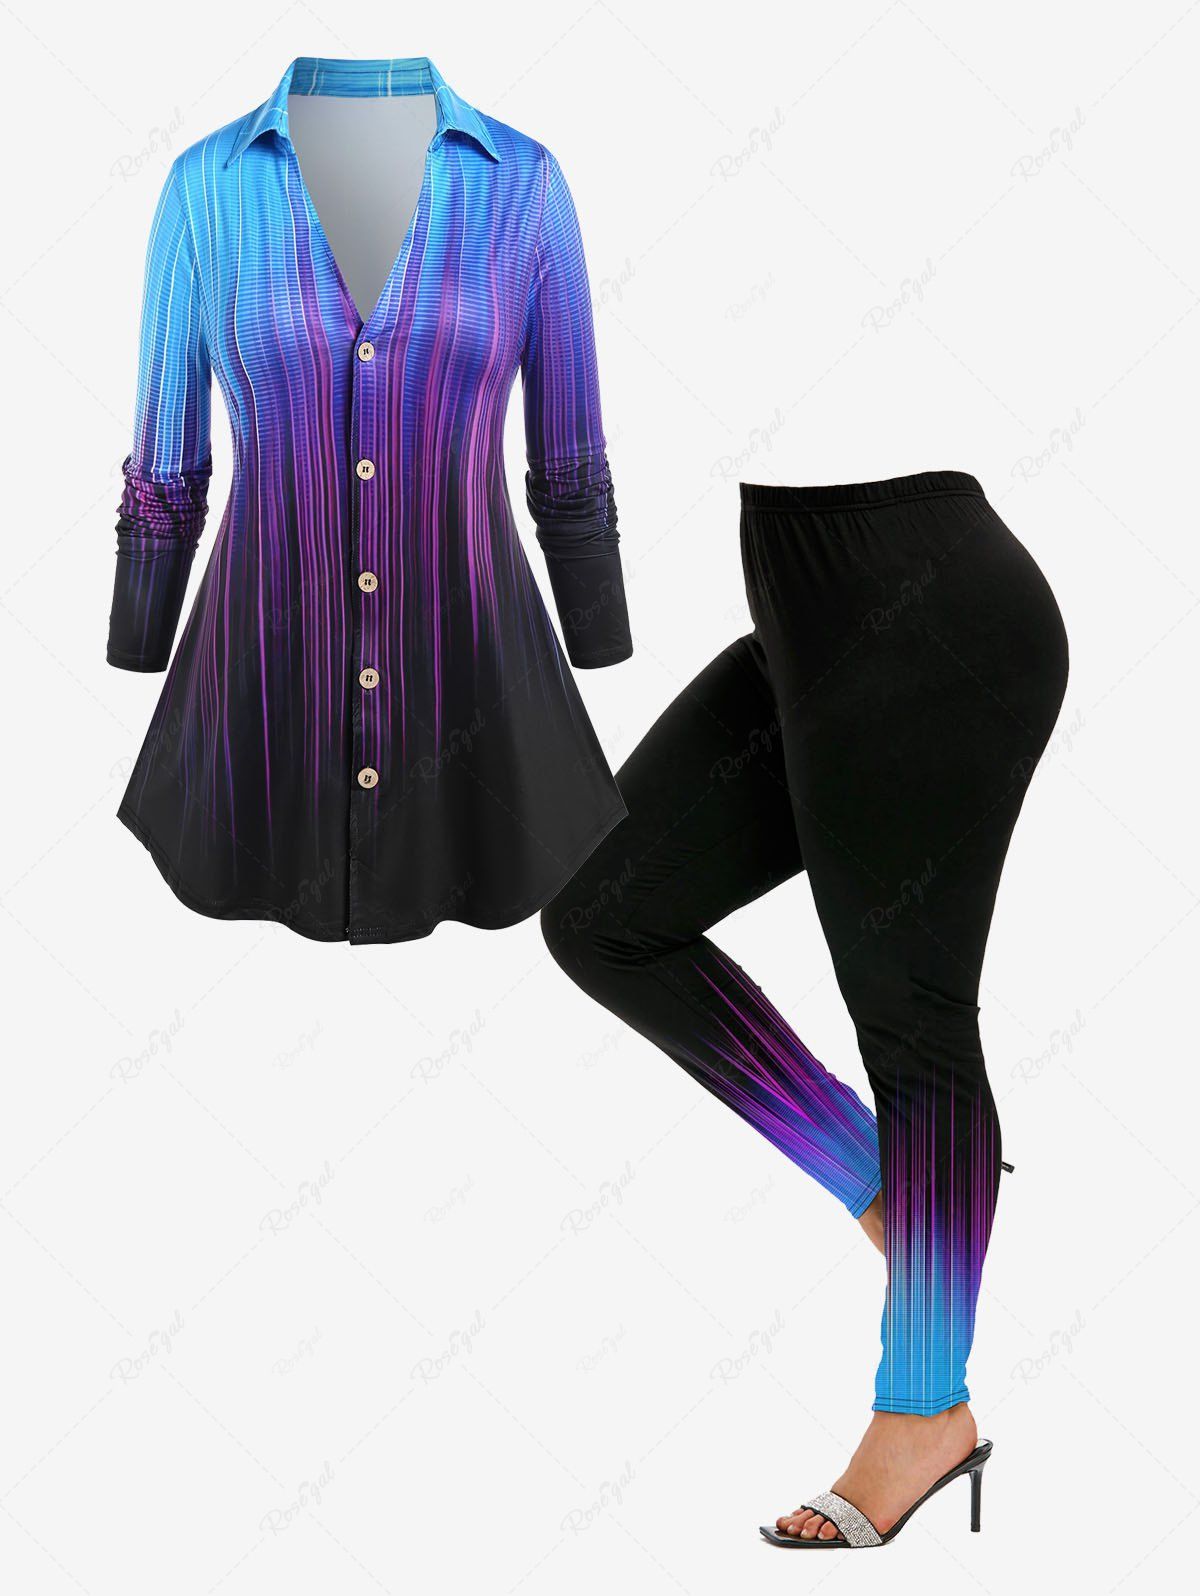 Hot Ombre Color Light Beam Print Button Up Shirt and High Waist Leggings Plus Size Outfit  